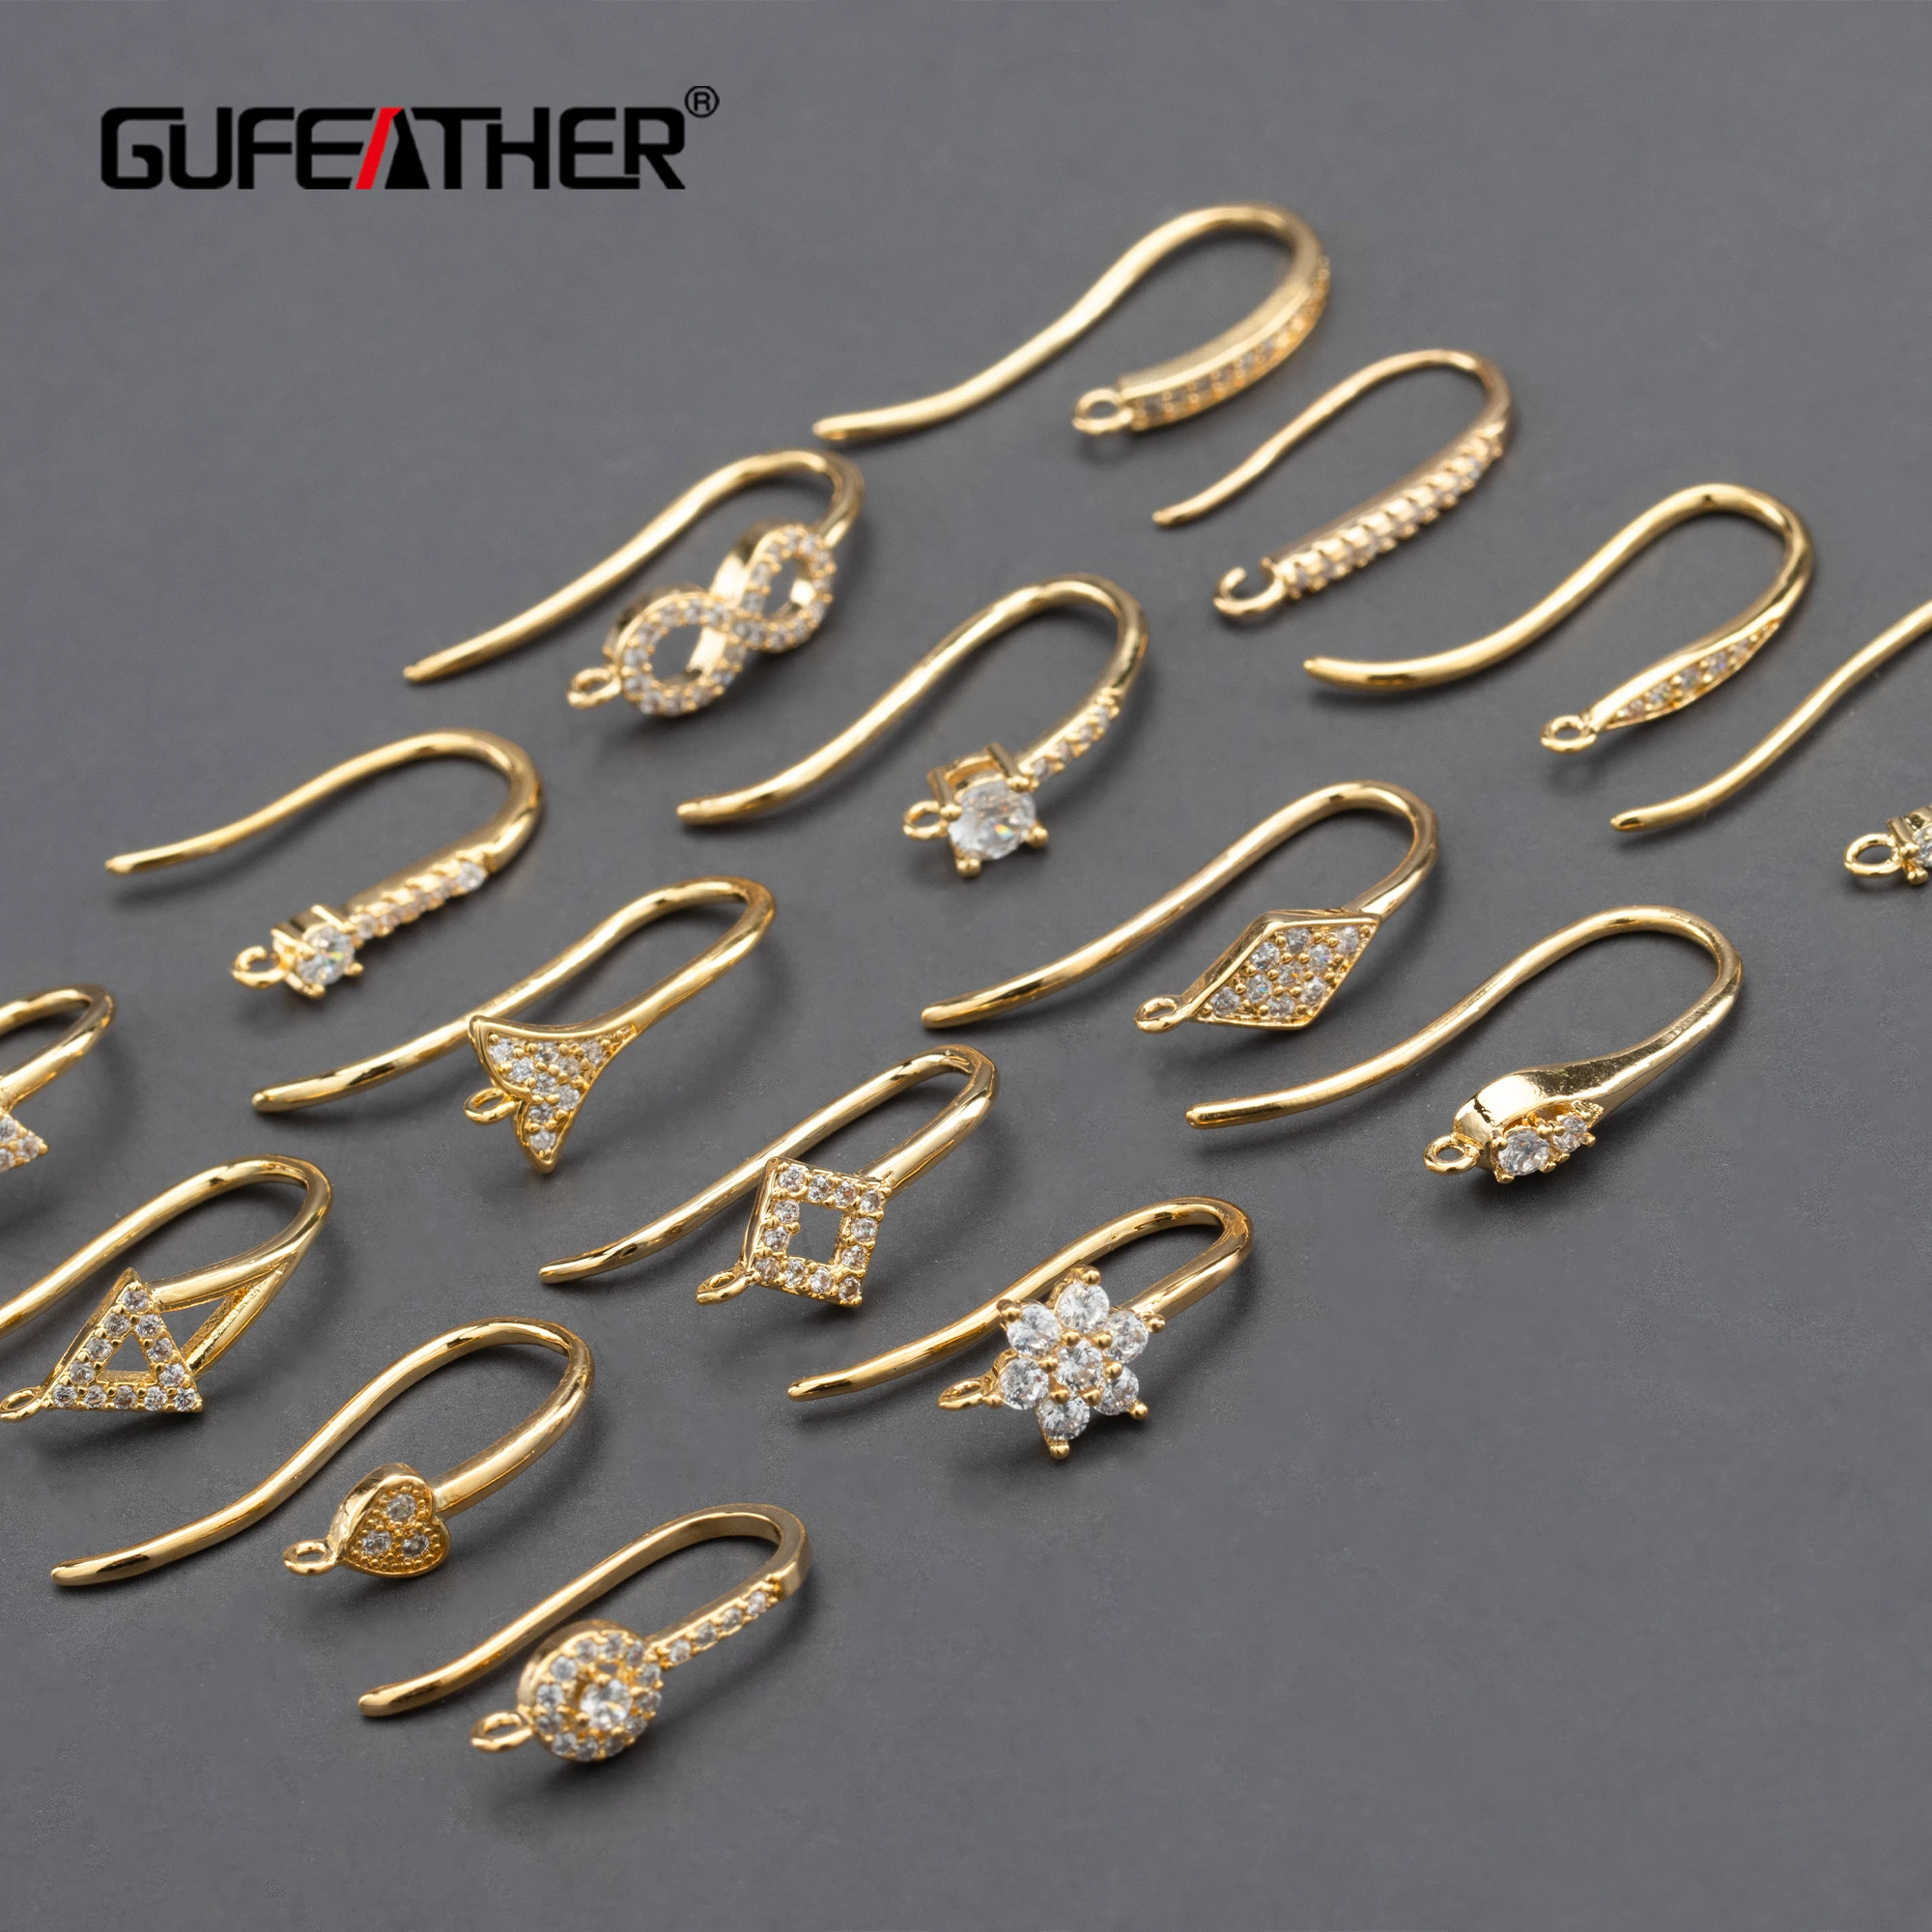 M800 Wholesale Jewelry Findings Components,18k Gold Plated,Diy Earring  Hooks Connectors For Women,20pcs/lot - Buy Jewelry Findings,Earring Hooks  Diy Jewelry Making,Jewelry Making Supplies Product on Alibaba.com